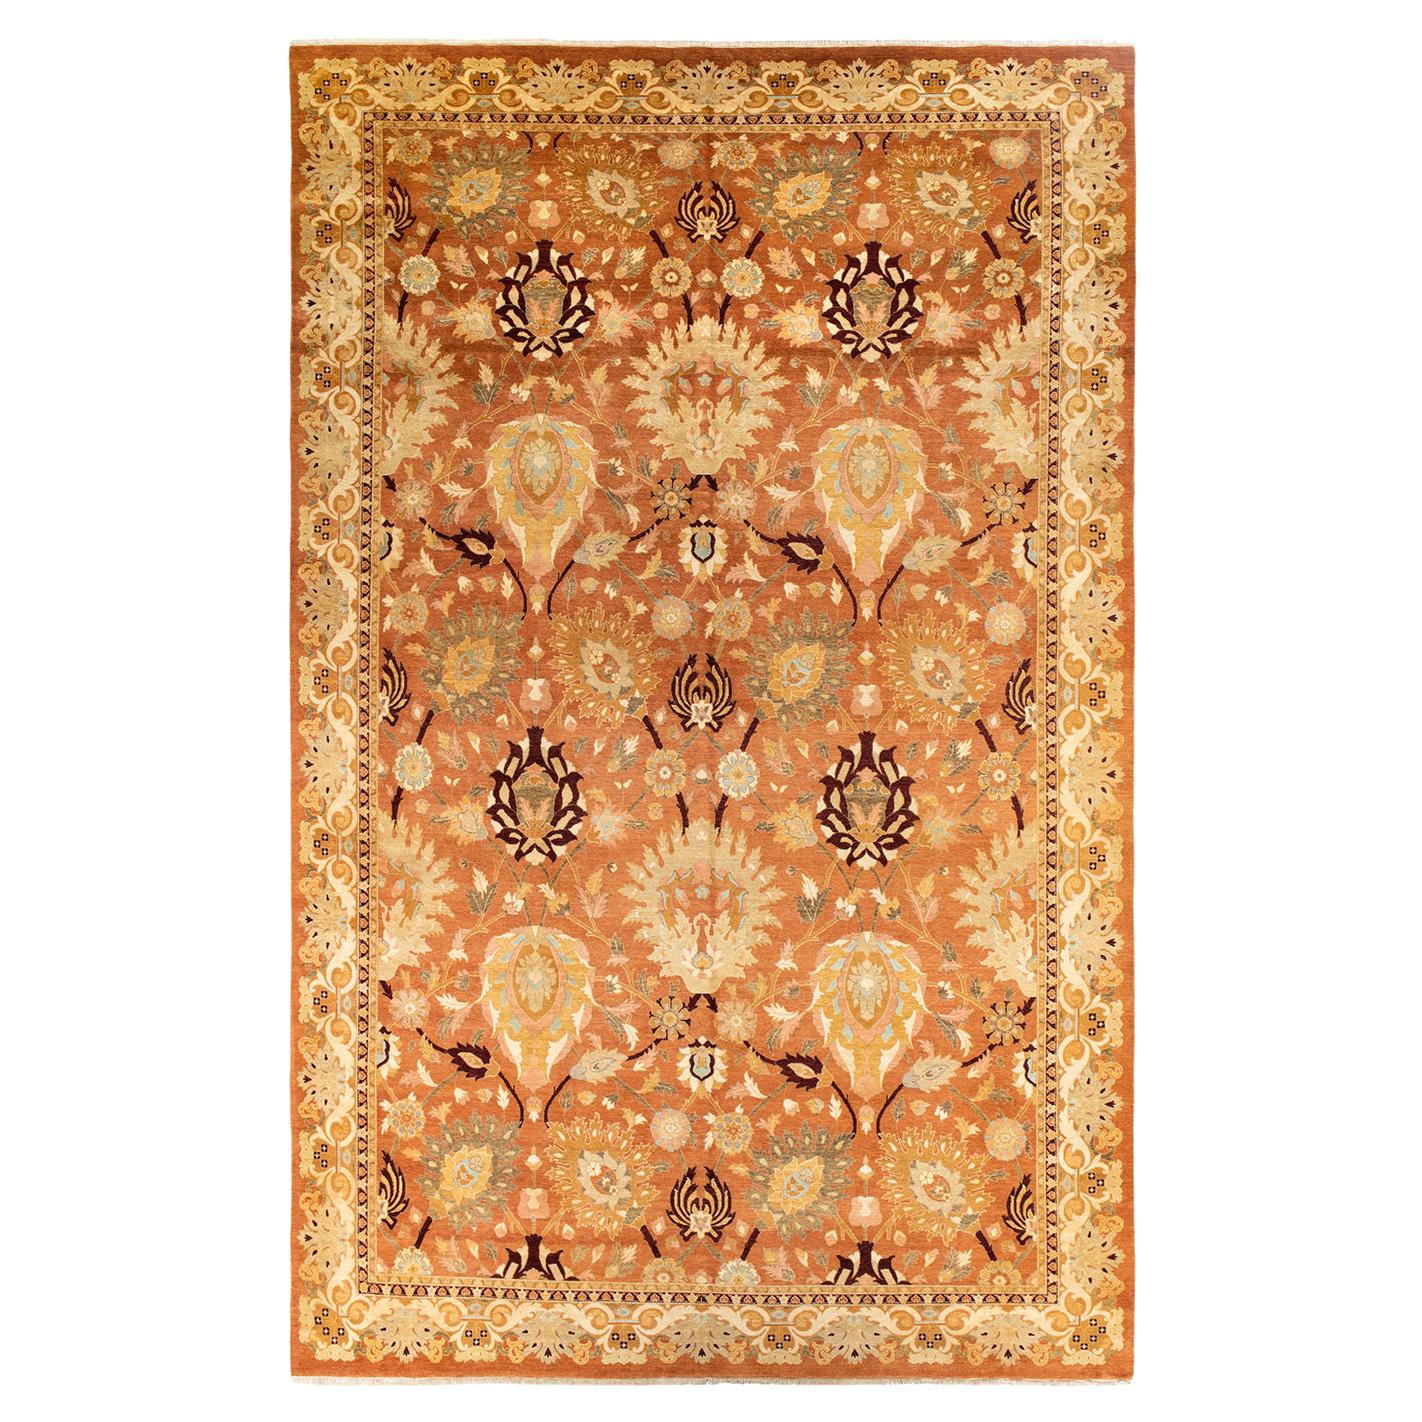 Eclectic, One-of-a-Kind Hand-Knotted Area Rug, Brown